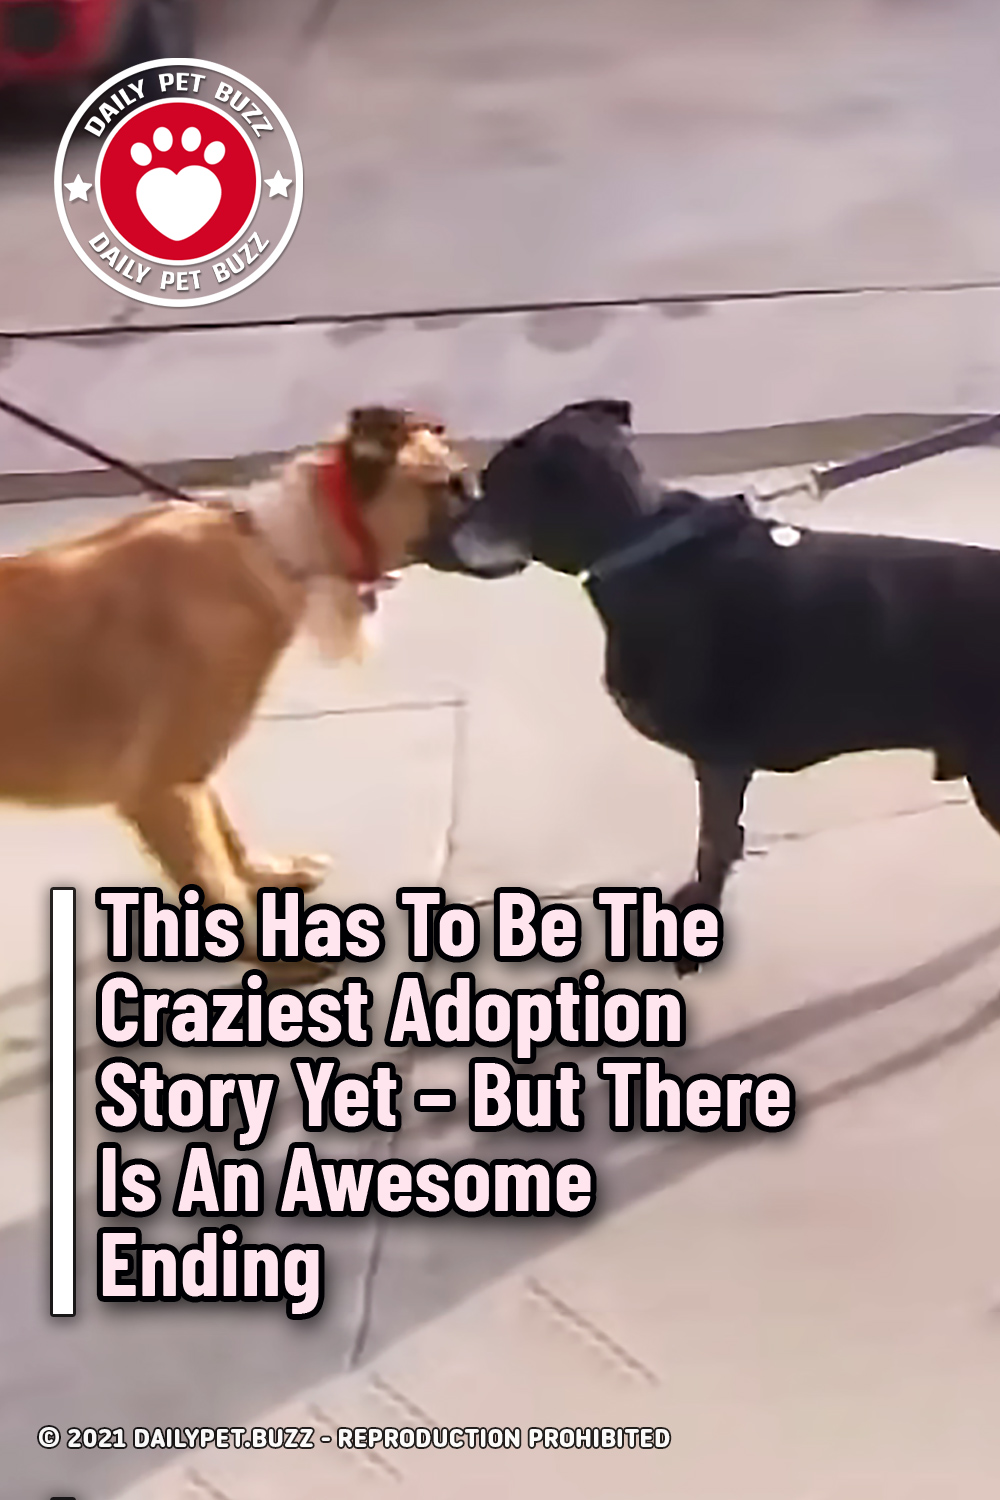 This Has To Be The Craziest Adoption Story Yet – But There Is An Awesome Ending